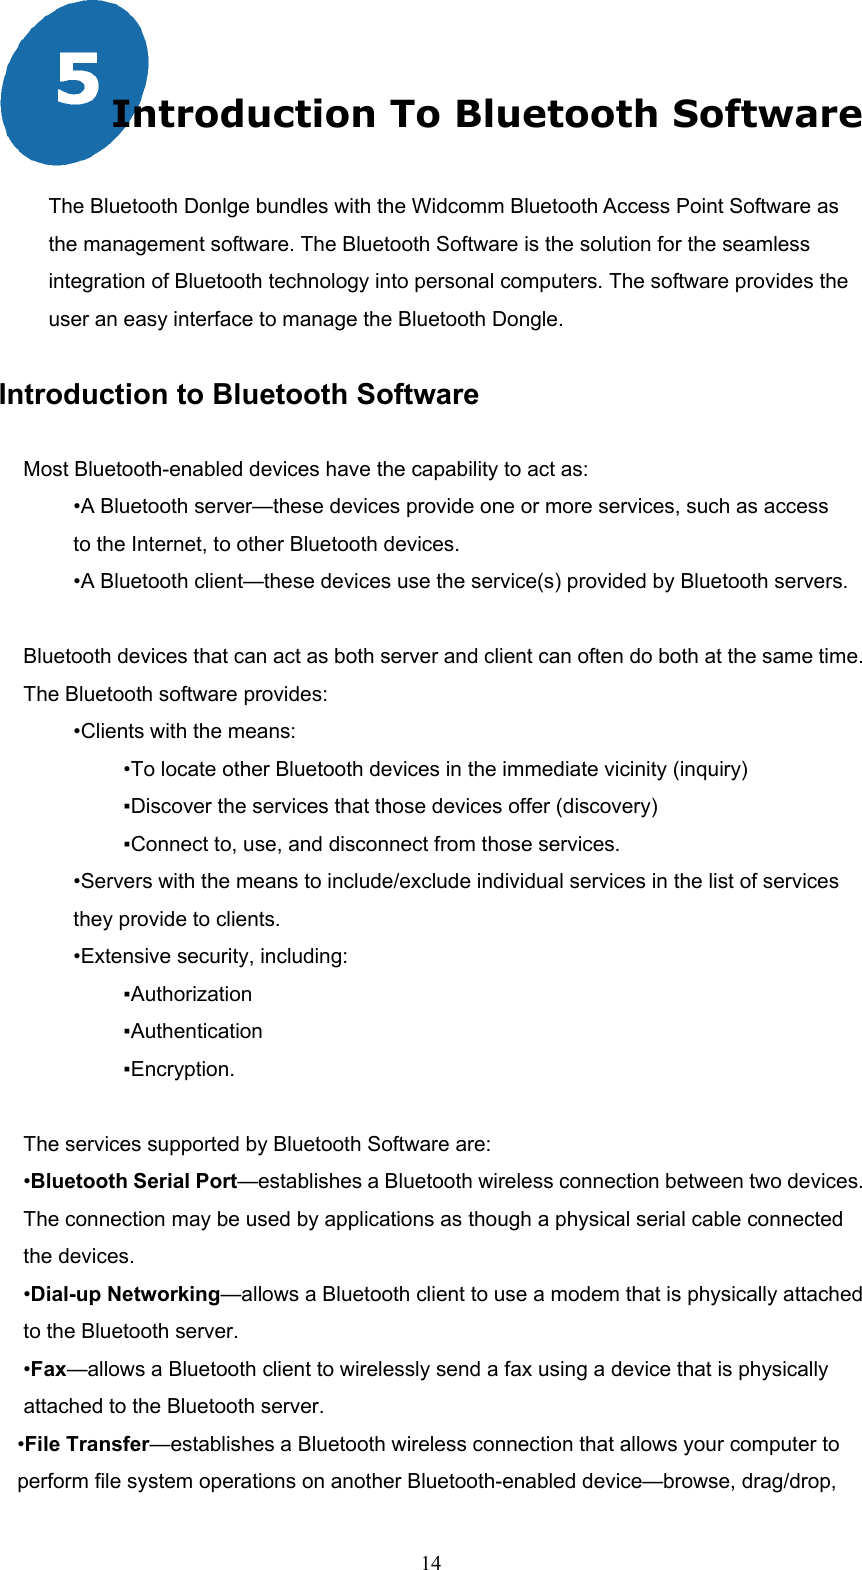  14  Introduction To Bluetooth Software  The Bluetooth Donlge bundles with the Widcomm Bluetooth Access Point Software as the management software. The Bluetooth Software is the solution for the seamless integration of Bluetooth technology into personal computers. The software provides the user an easy interface to manage the Bluetooth Dongle.    Introduction to Bluetooth Software  Most Bluetooth-enabled devices have the capability to act as: •A Bluetooth server—these devices provide one or more services, such as access to the Internet, to other Bluetooth devices. •A Bluetooth client—these devices use the service(s) provided by Bluetooth servers.  Bluetooth devices that can act as both server and client can often do both at the same time. The Bluetooth software provides: •Clients with the means: •To locate other Bluetooth devices in the immediate vicinity (inquiry) ▪Discover the services that those devices offer (discovery) ▪Connect to, use, and disconnect from those services. •Servers with the means to include/exclude individual services in the list of services they provide to clients. •Extensive security, including: ▪Authorization ▪Authentication ▪Encryption.  The services supported by Bluetooth Software are: •Bluetooth Serial Port—establishes a Bluetooth wireless connection between two devices. The connection may be used by applications as though a physical serial cable connected the devices. •Dial-up Networking—allows a Bluetooth client to use a modem that is physically attached to the Bluetooth server. •Fax—allows a Bluetooth client to wirelessly send a fax using a device that is physically attached to the Bluetooth server. •File Transfer—establishes a Bluetooth wireless connection that allows your computer to perform file system operations on another Bluetooth-enabled device—browse, drag/drop, 